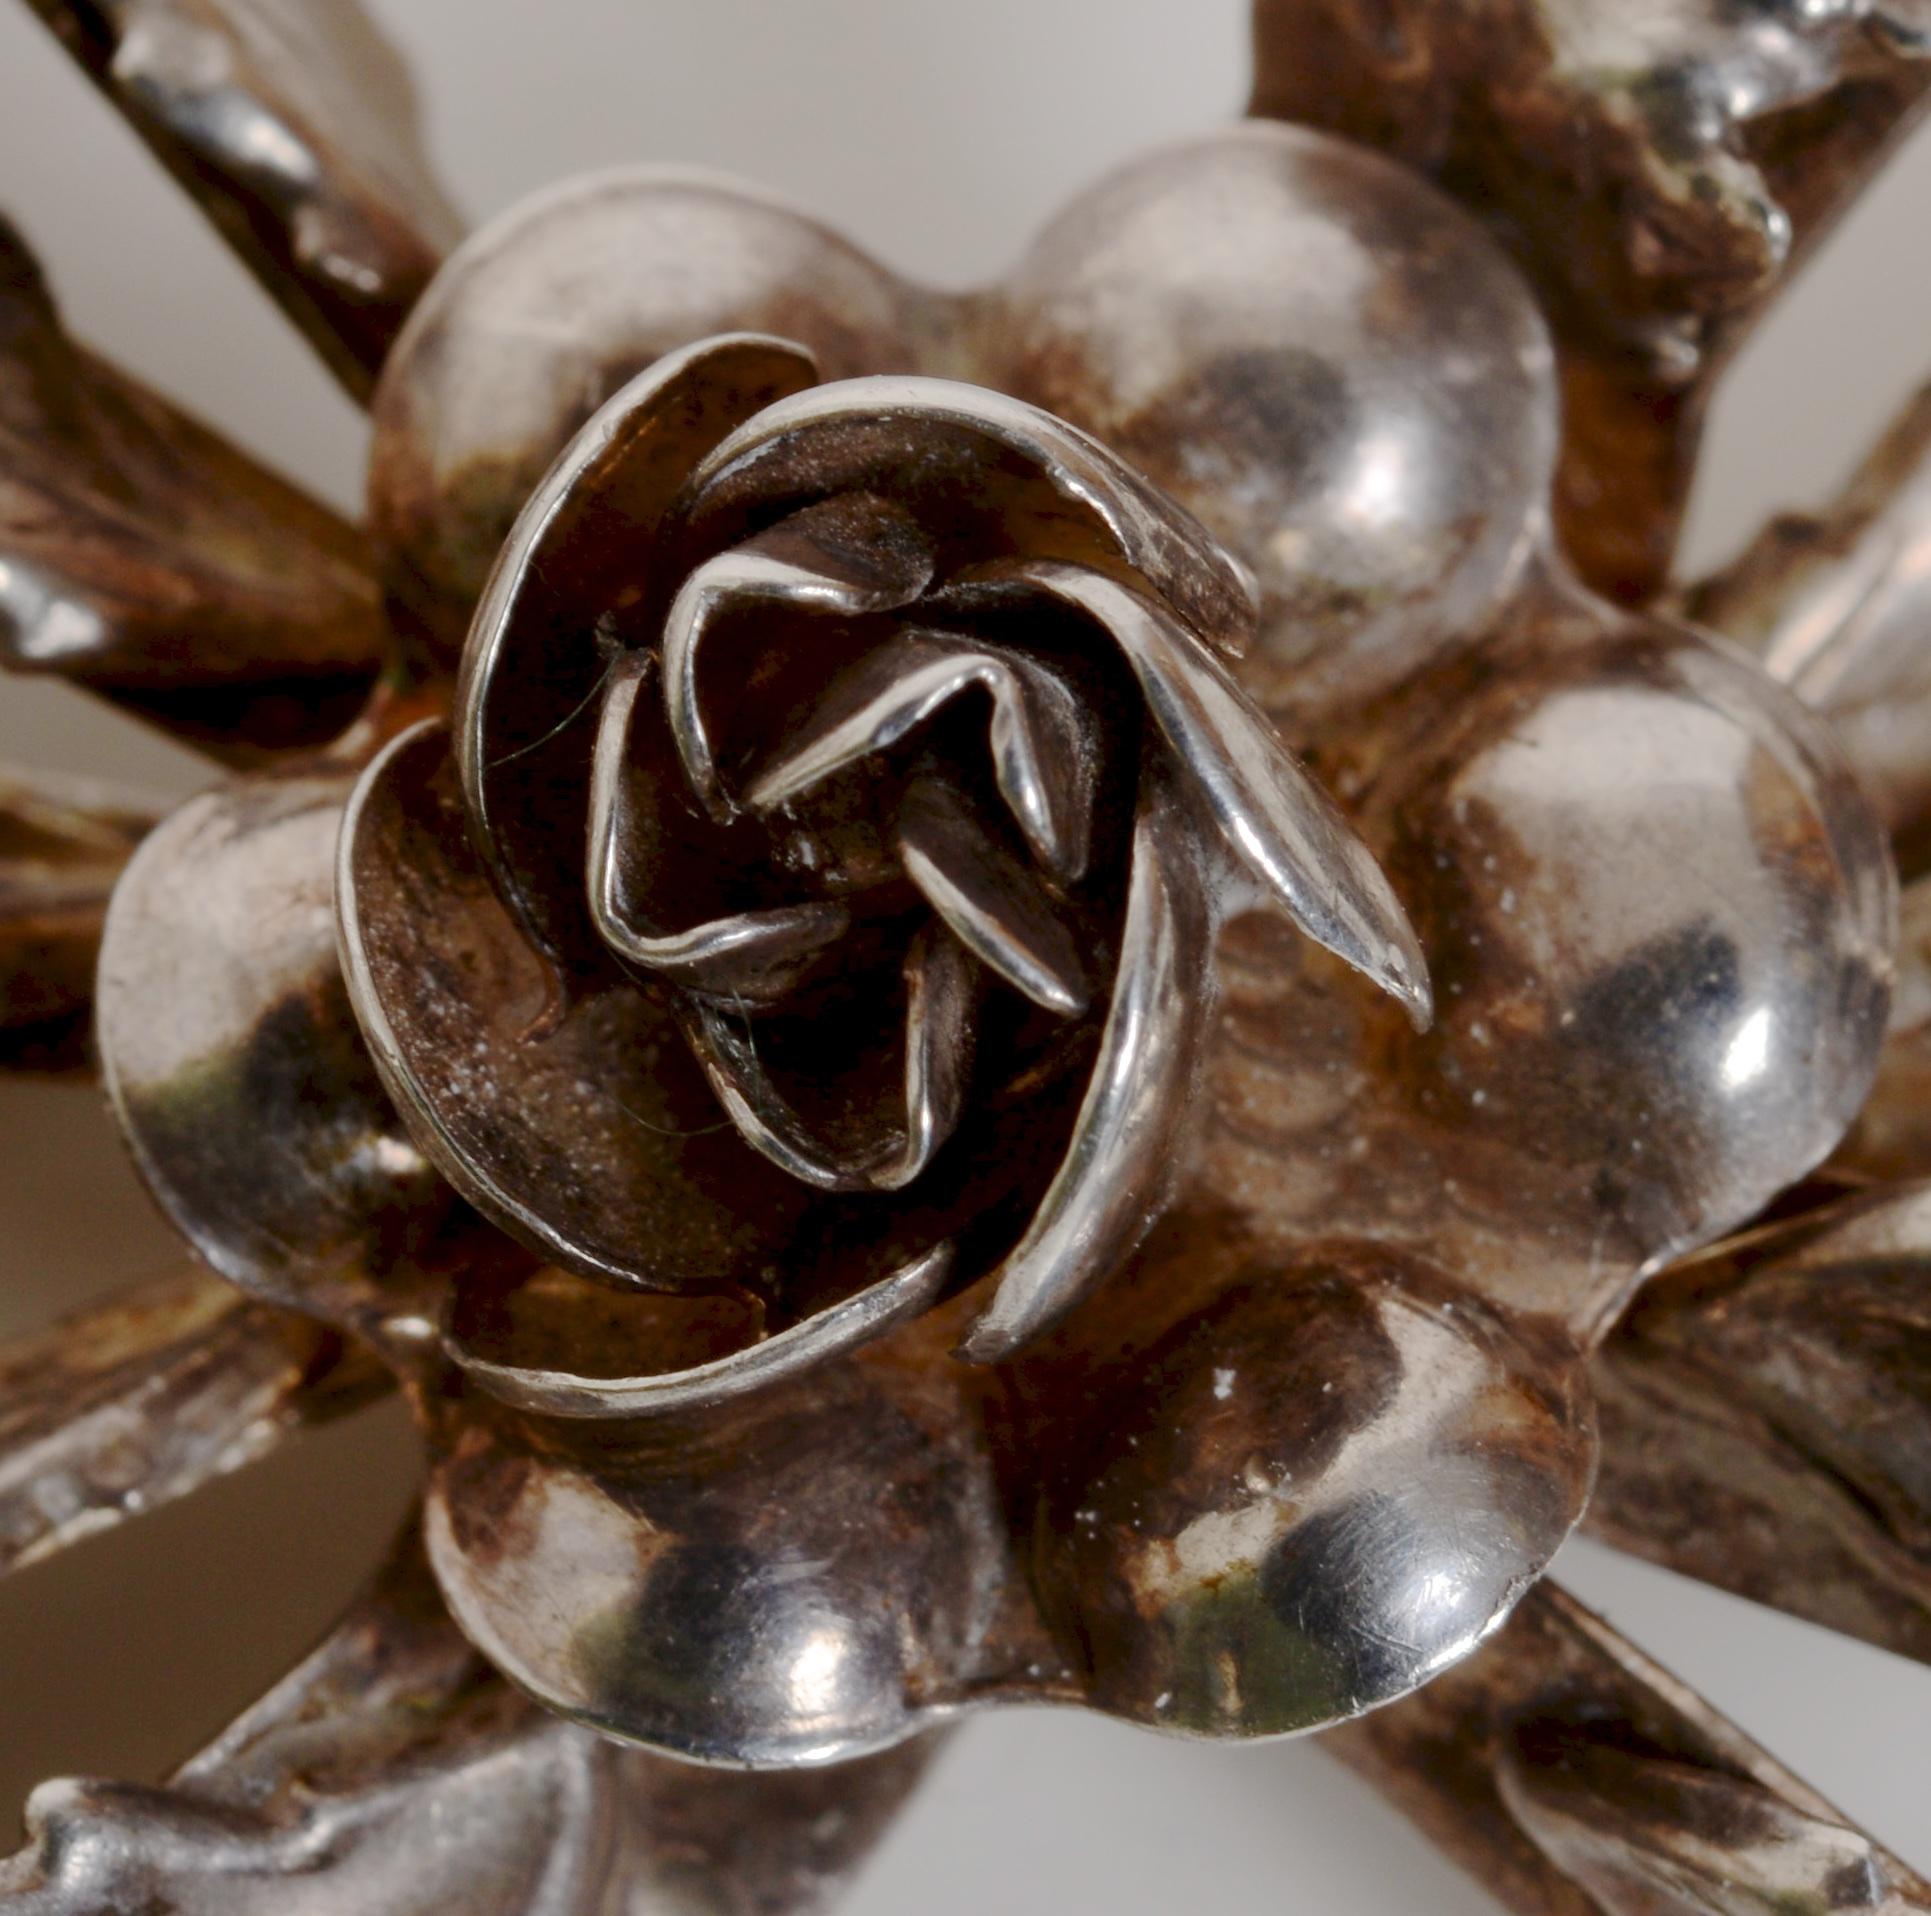 Classic Sterling Silver Brooch Ribbon and Flower Design, c1942, Signed Hobé. This is a classic collector's Hobé Sterling Silver floral and ribbon brooch with a rose in the center and buds set on a double ribbon bow. The brooch was designed in 1942